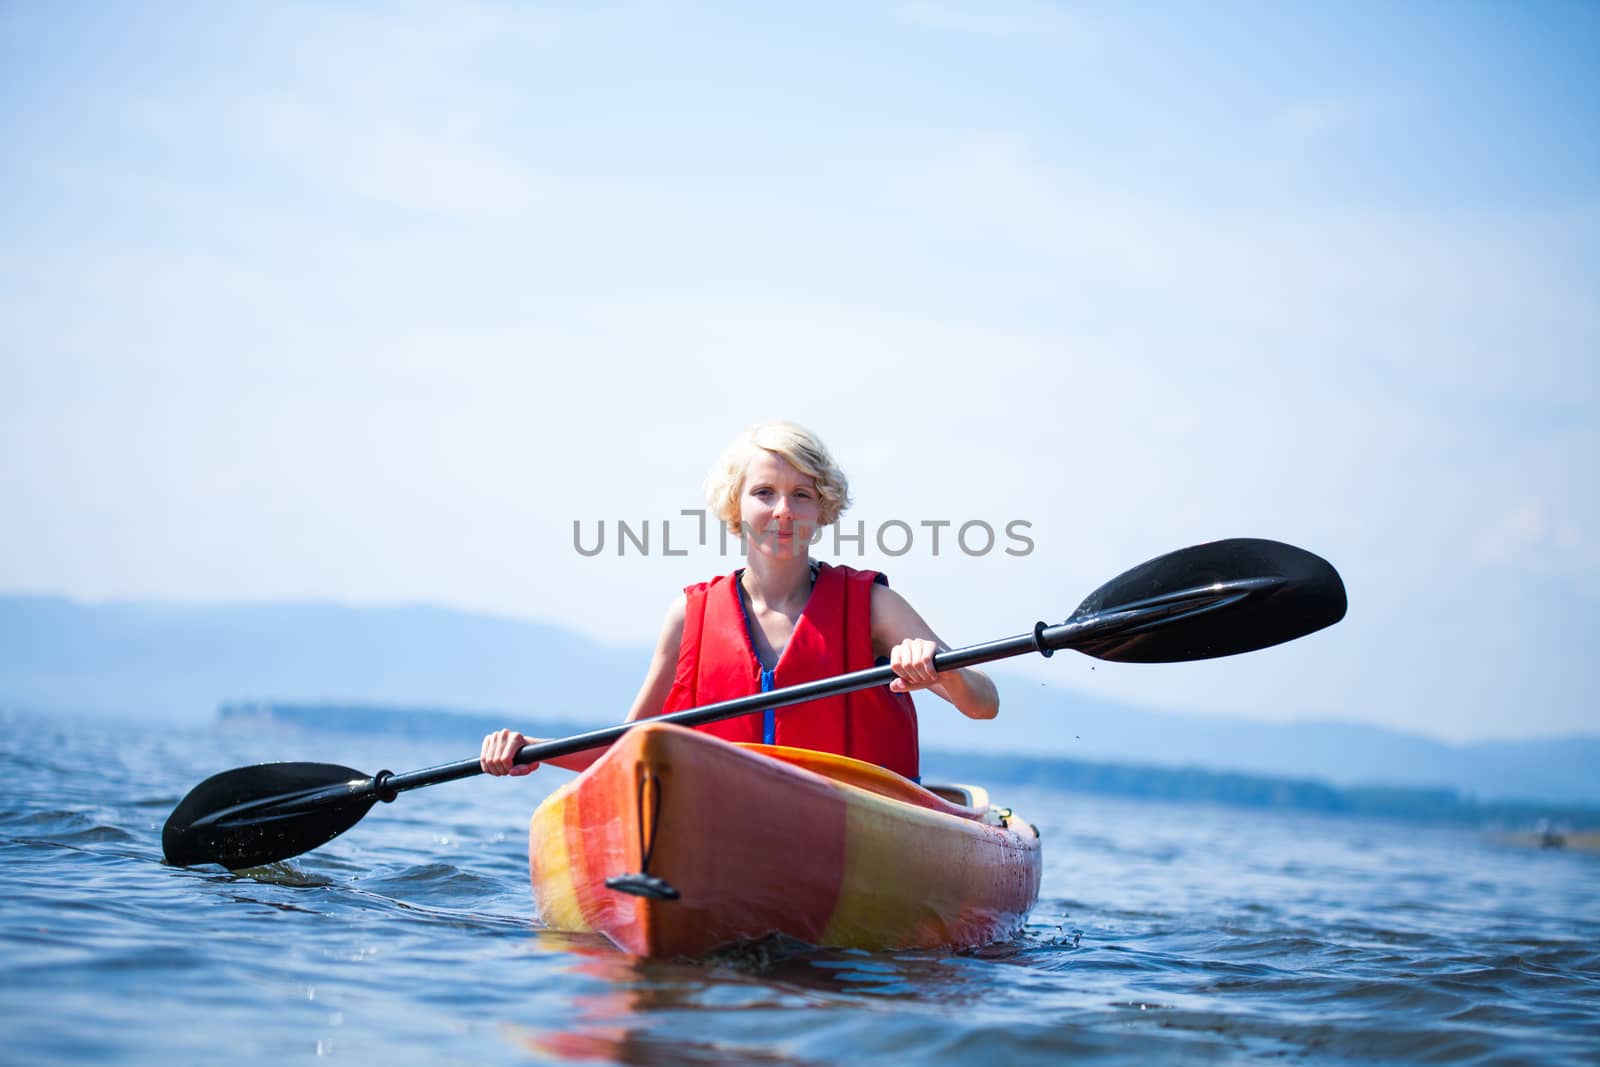 Young Woman Kayaking Alone on a Calm Sea and Wearing a Safety Vest